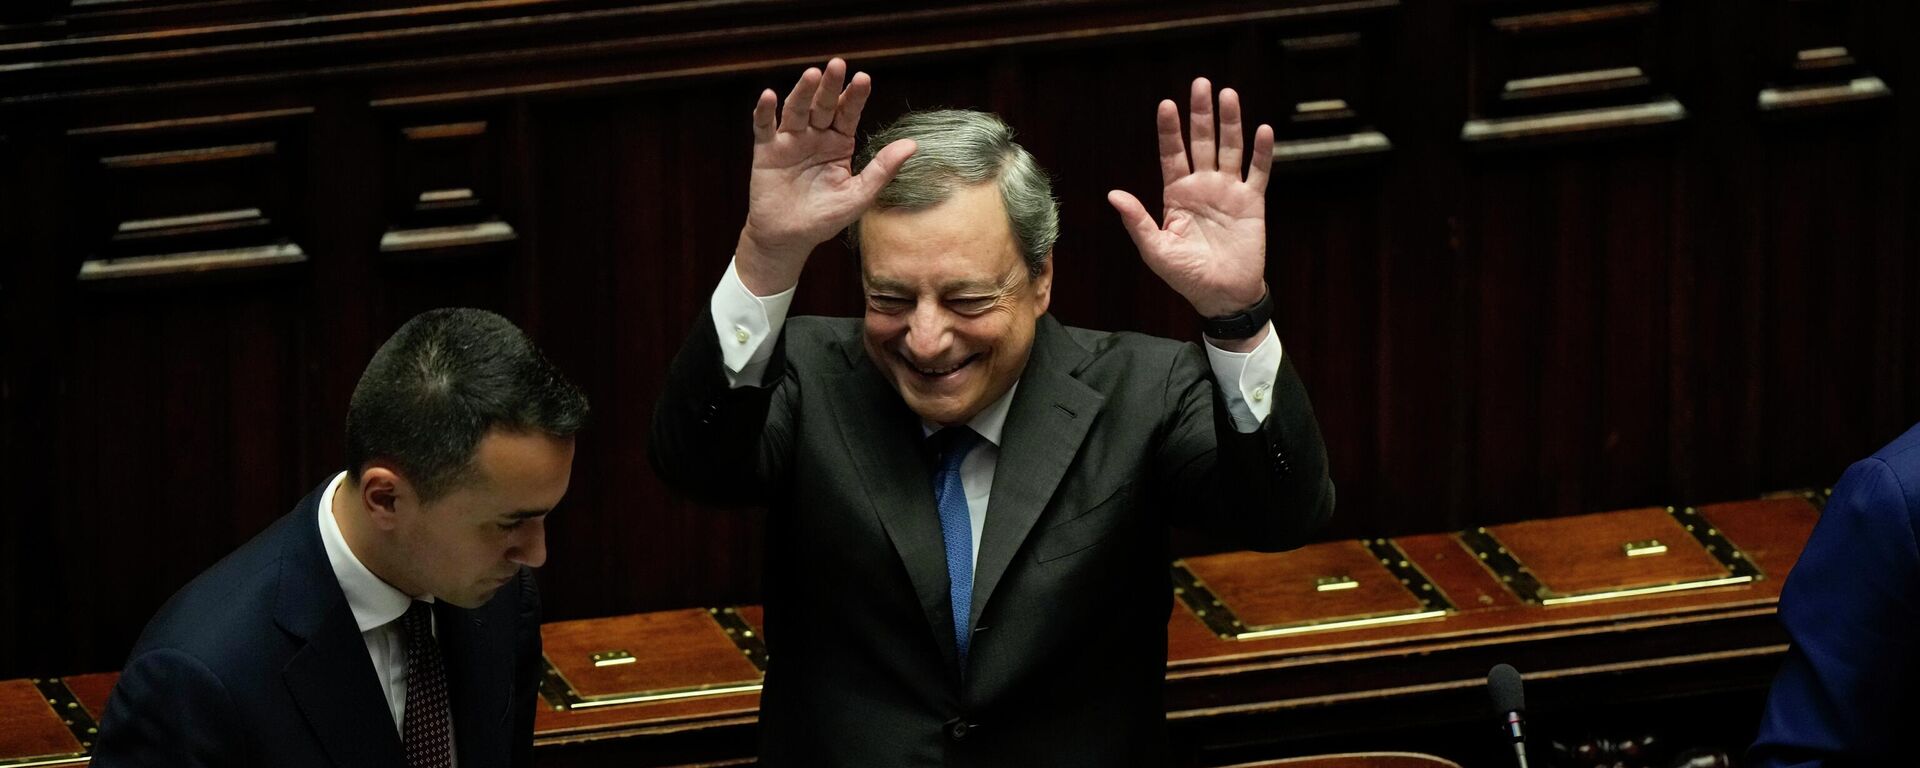 Italian Premier Mario Draghi waves to lawmakers at the end of his address at the Parliament in Rome, Thursday, July 21, 2022 - Sputnik International, 1920, 21.07.2022